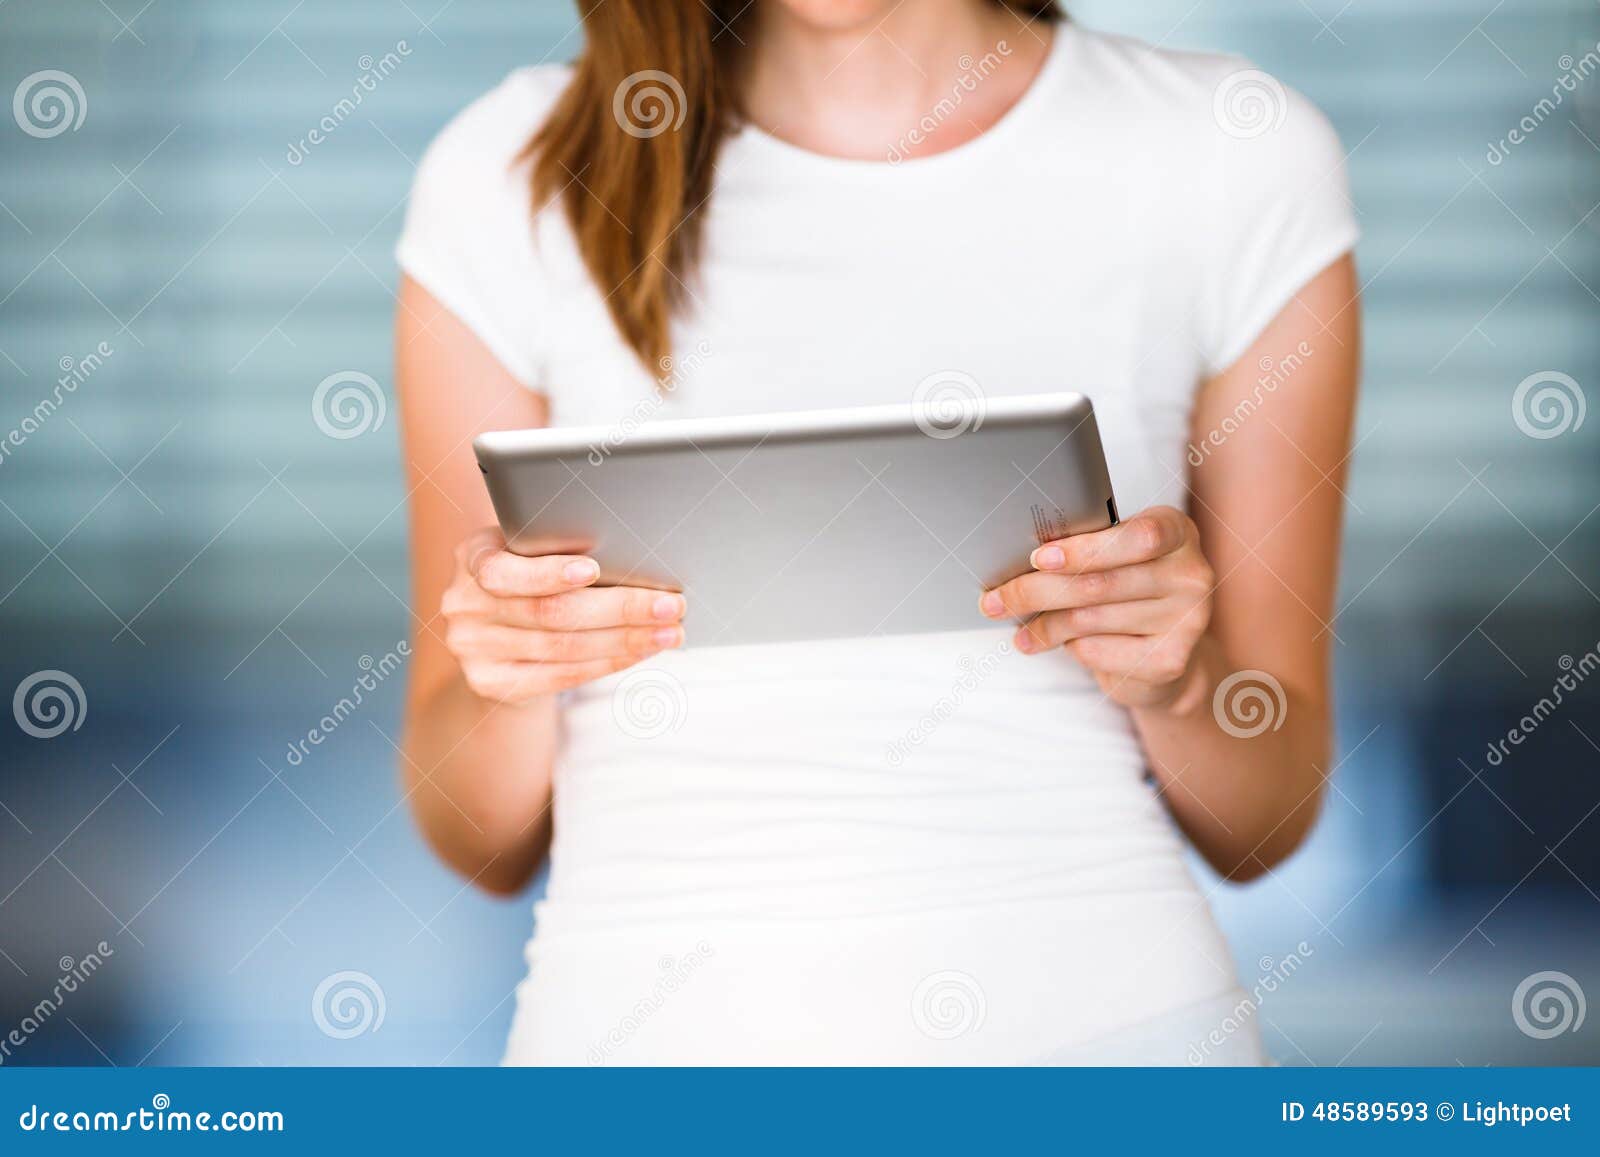 pretty, young businesswoman/colle ge student using her tablet